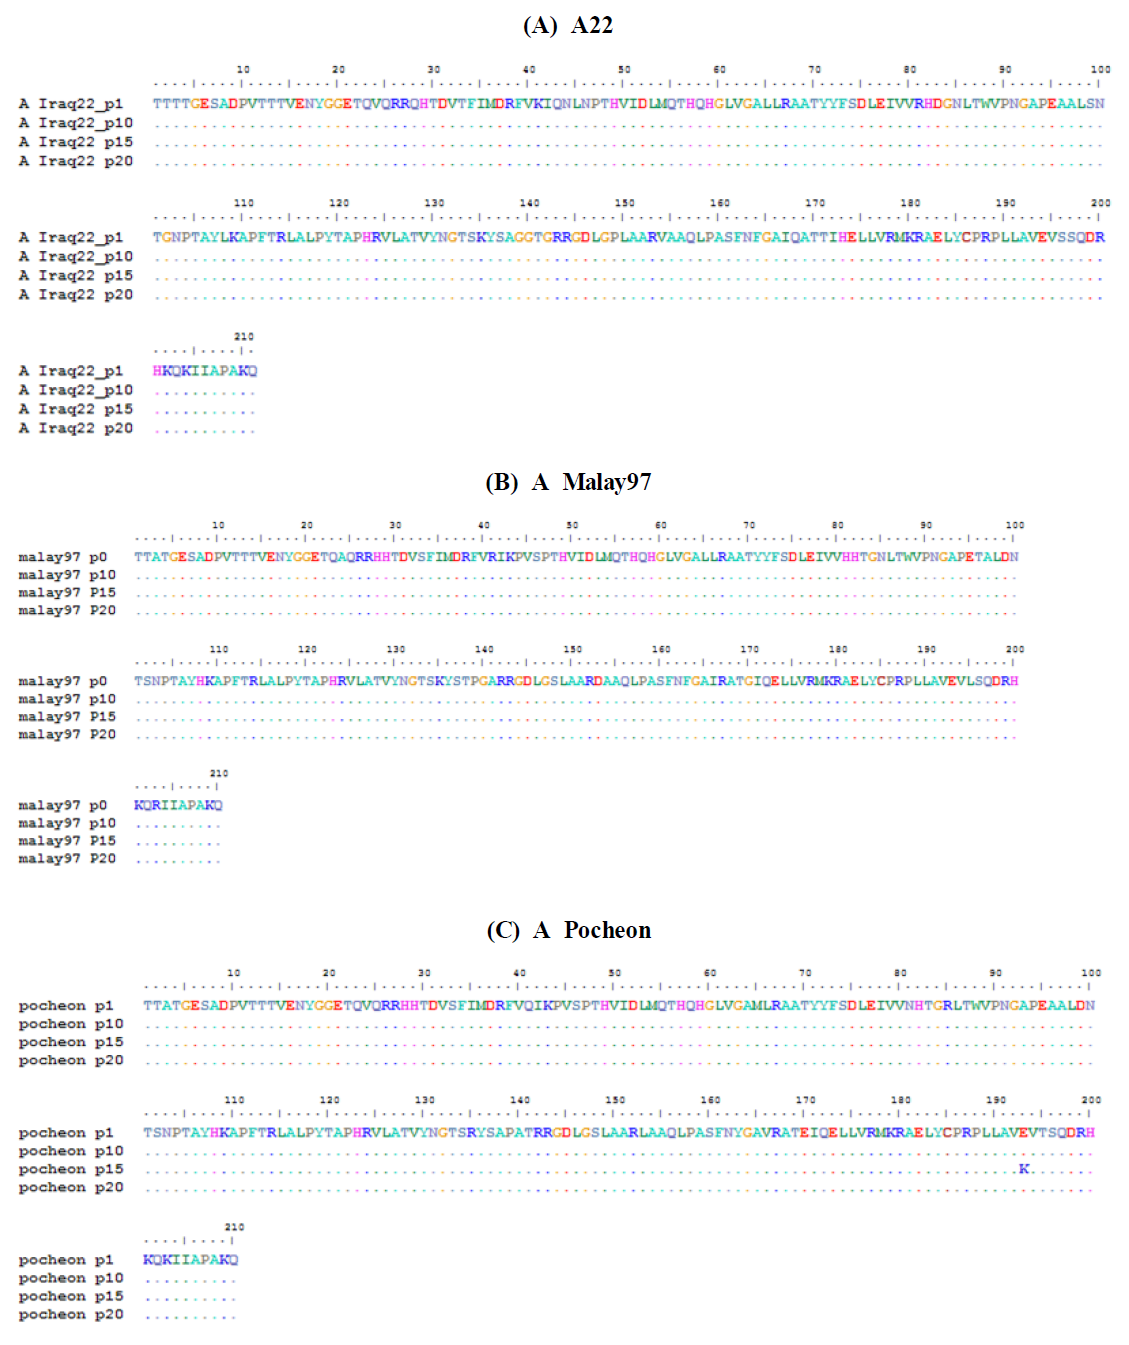 Sequence of A type viruses(A22, A Malay97, A Pocheon) after serial passage under the neutralizing antibody from E. coli vaccine -immunized cattle